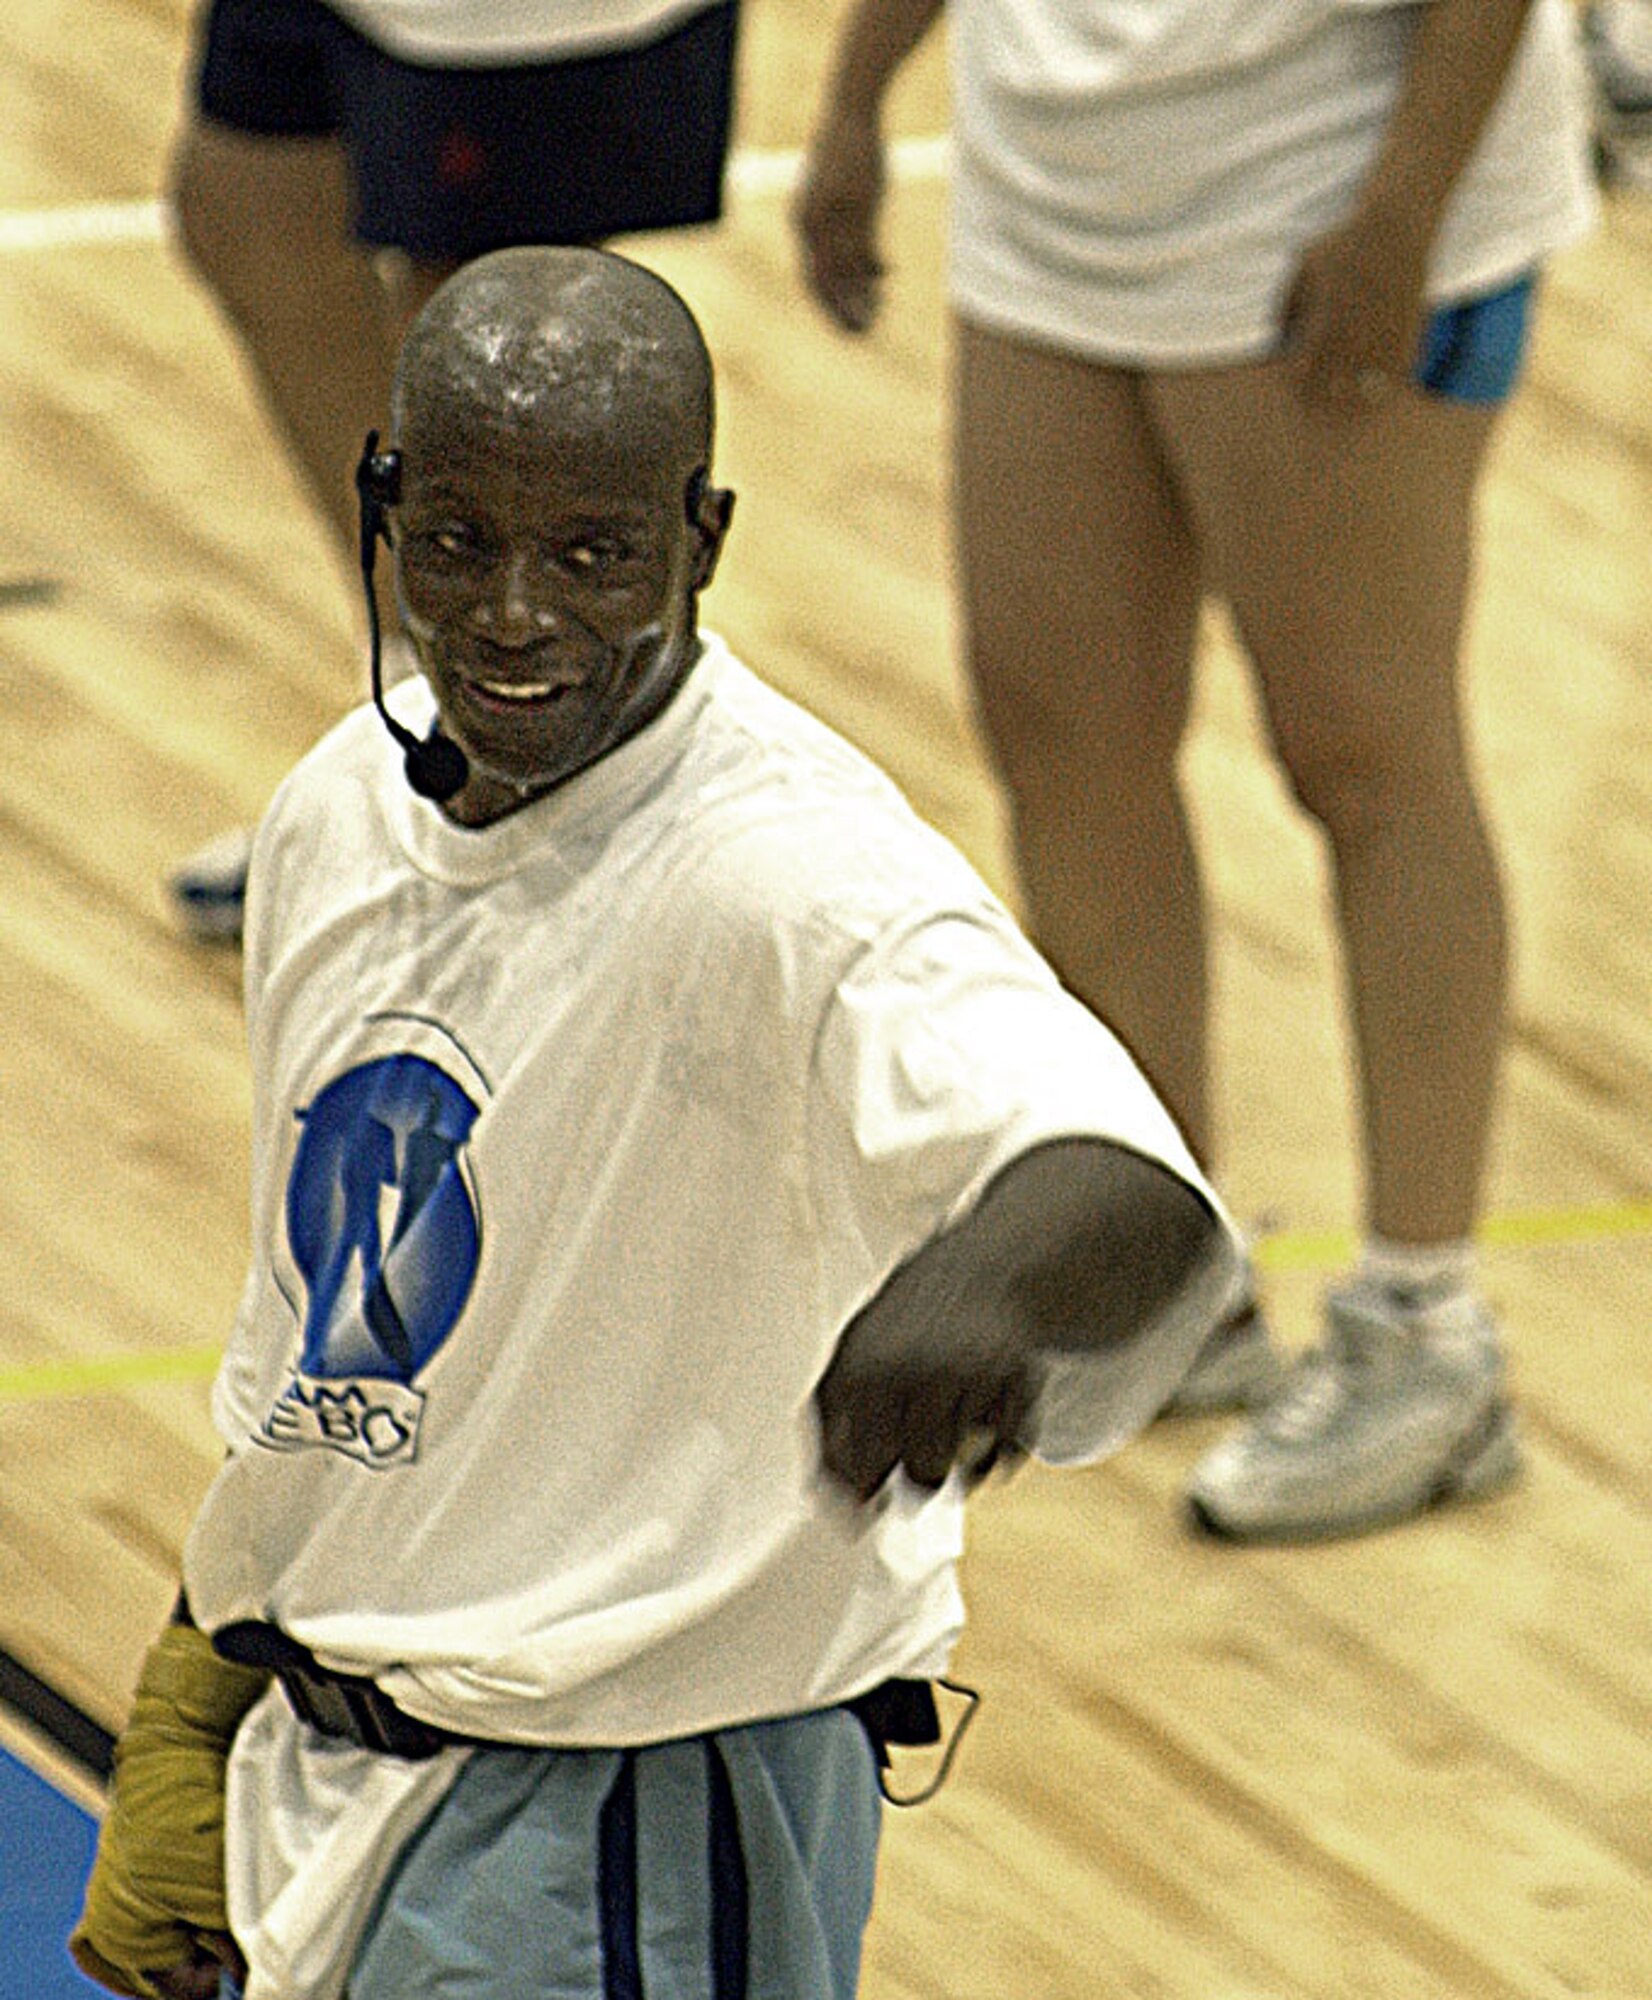 Tae Bo creator helps open fitness center > Air Force > Article Display